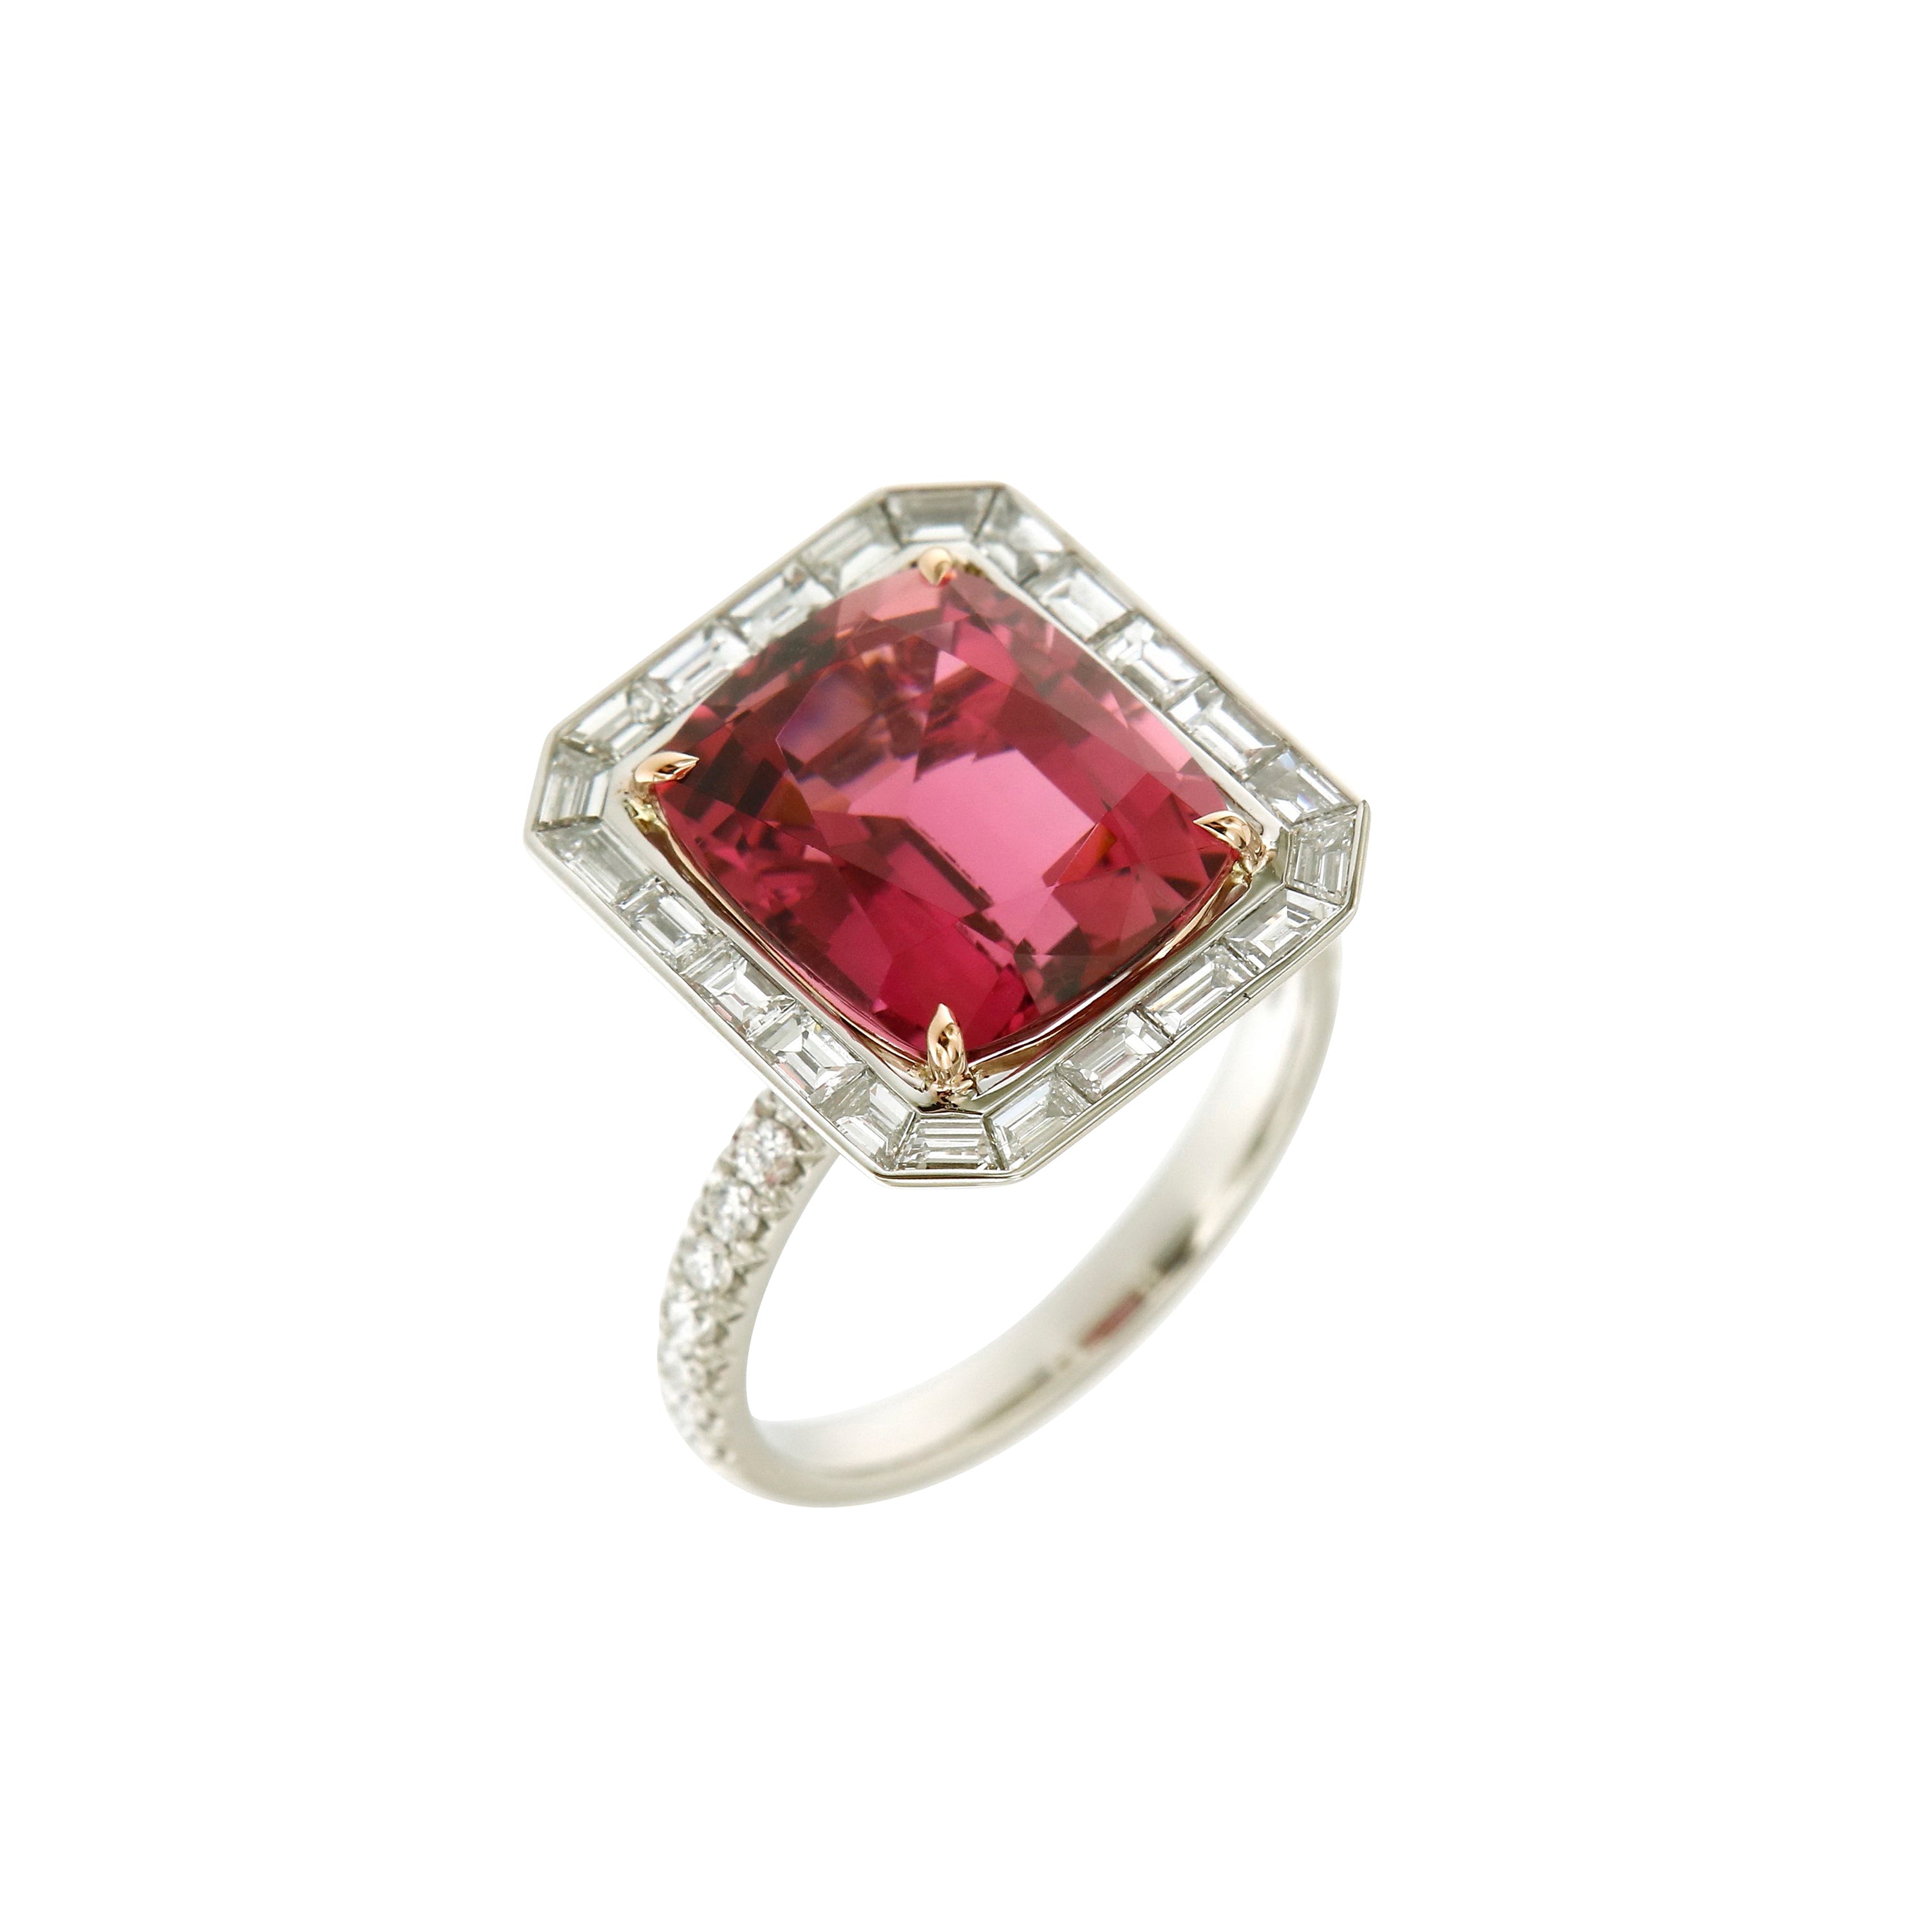 Ring White Gold with a 7.3ct. Pink Tourmaline and White Diamonds